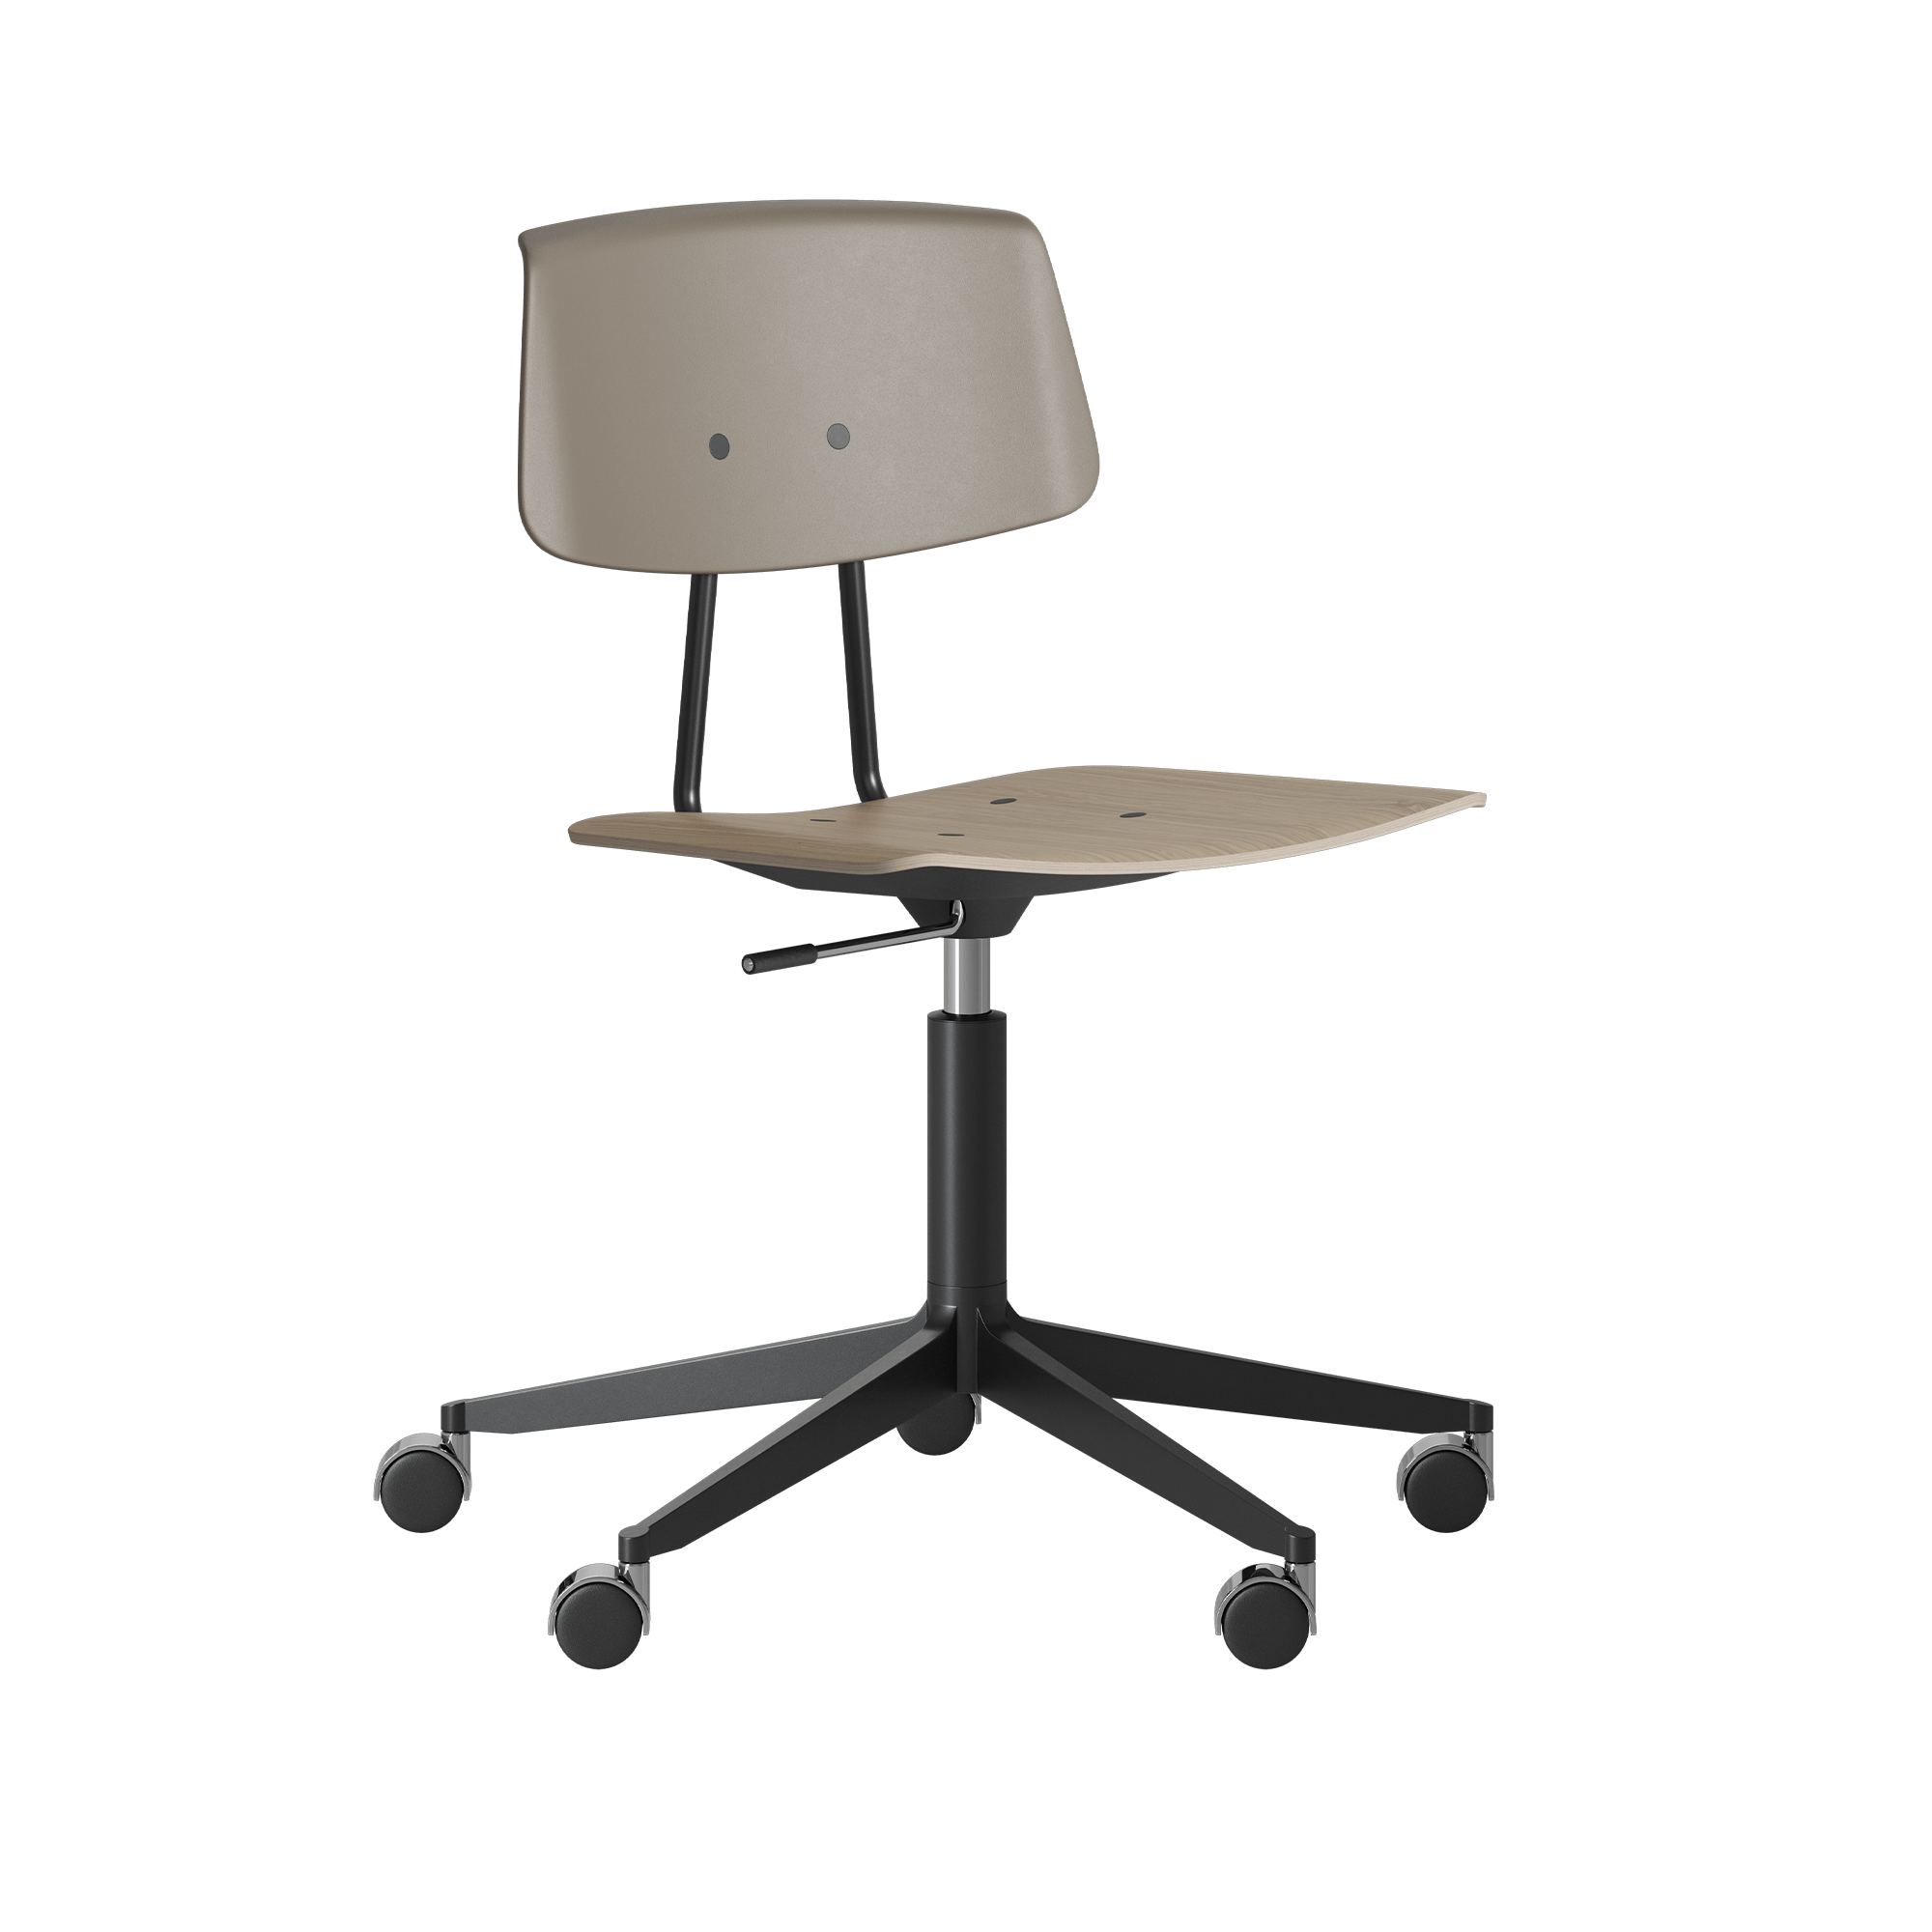 A Share Move Alu 30 office desk chair